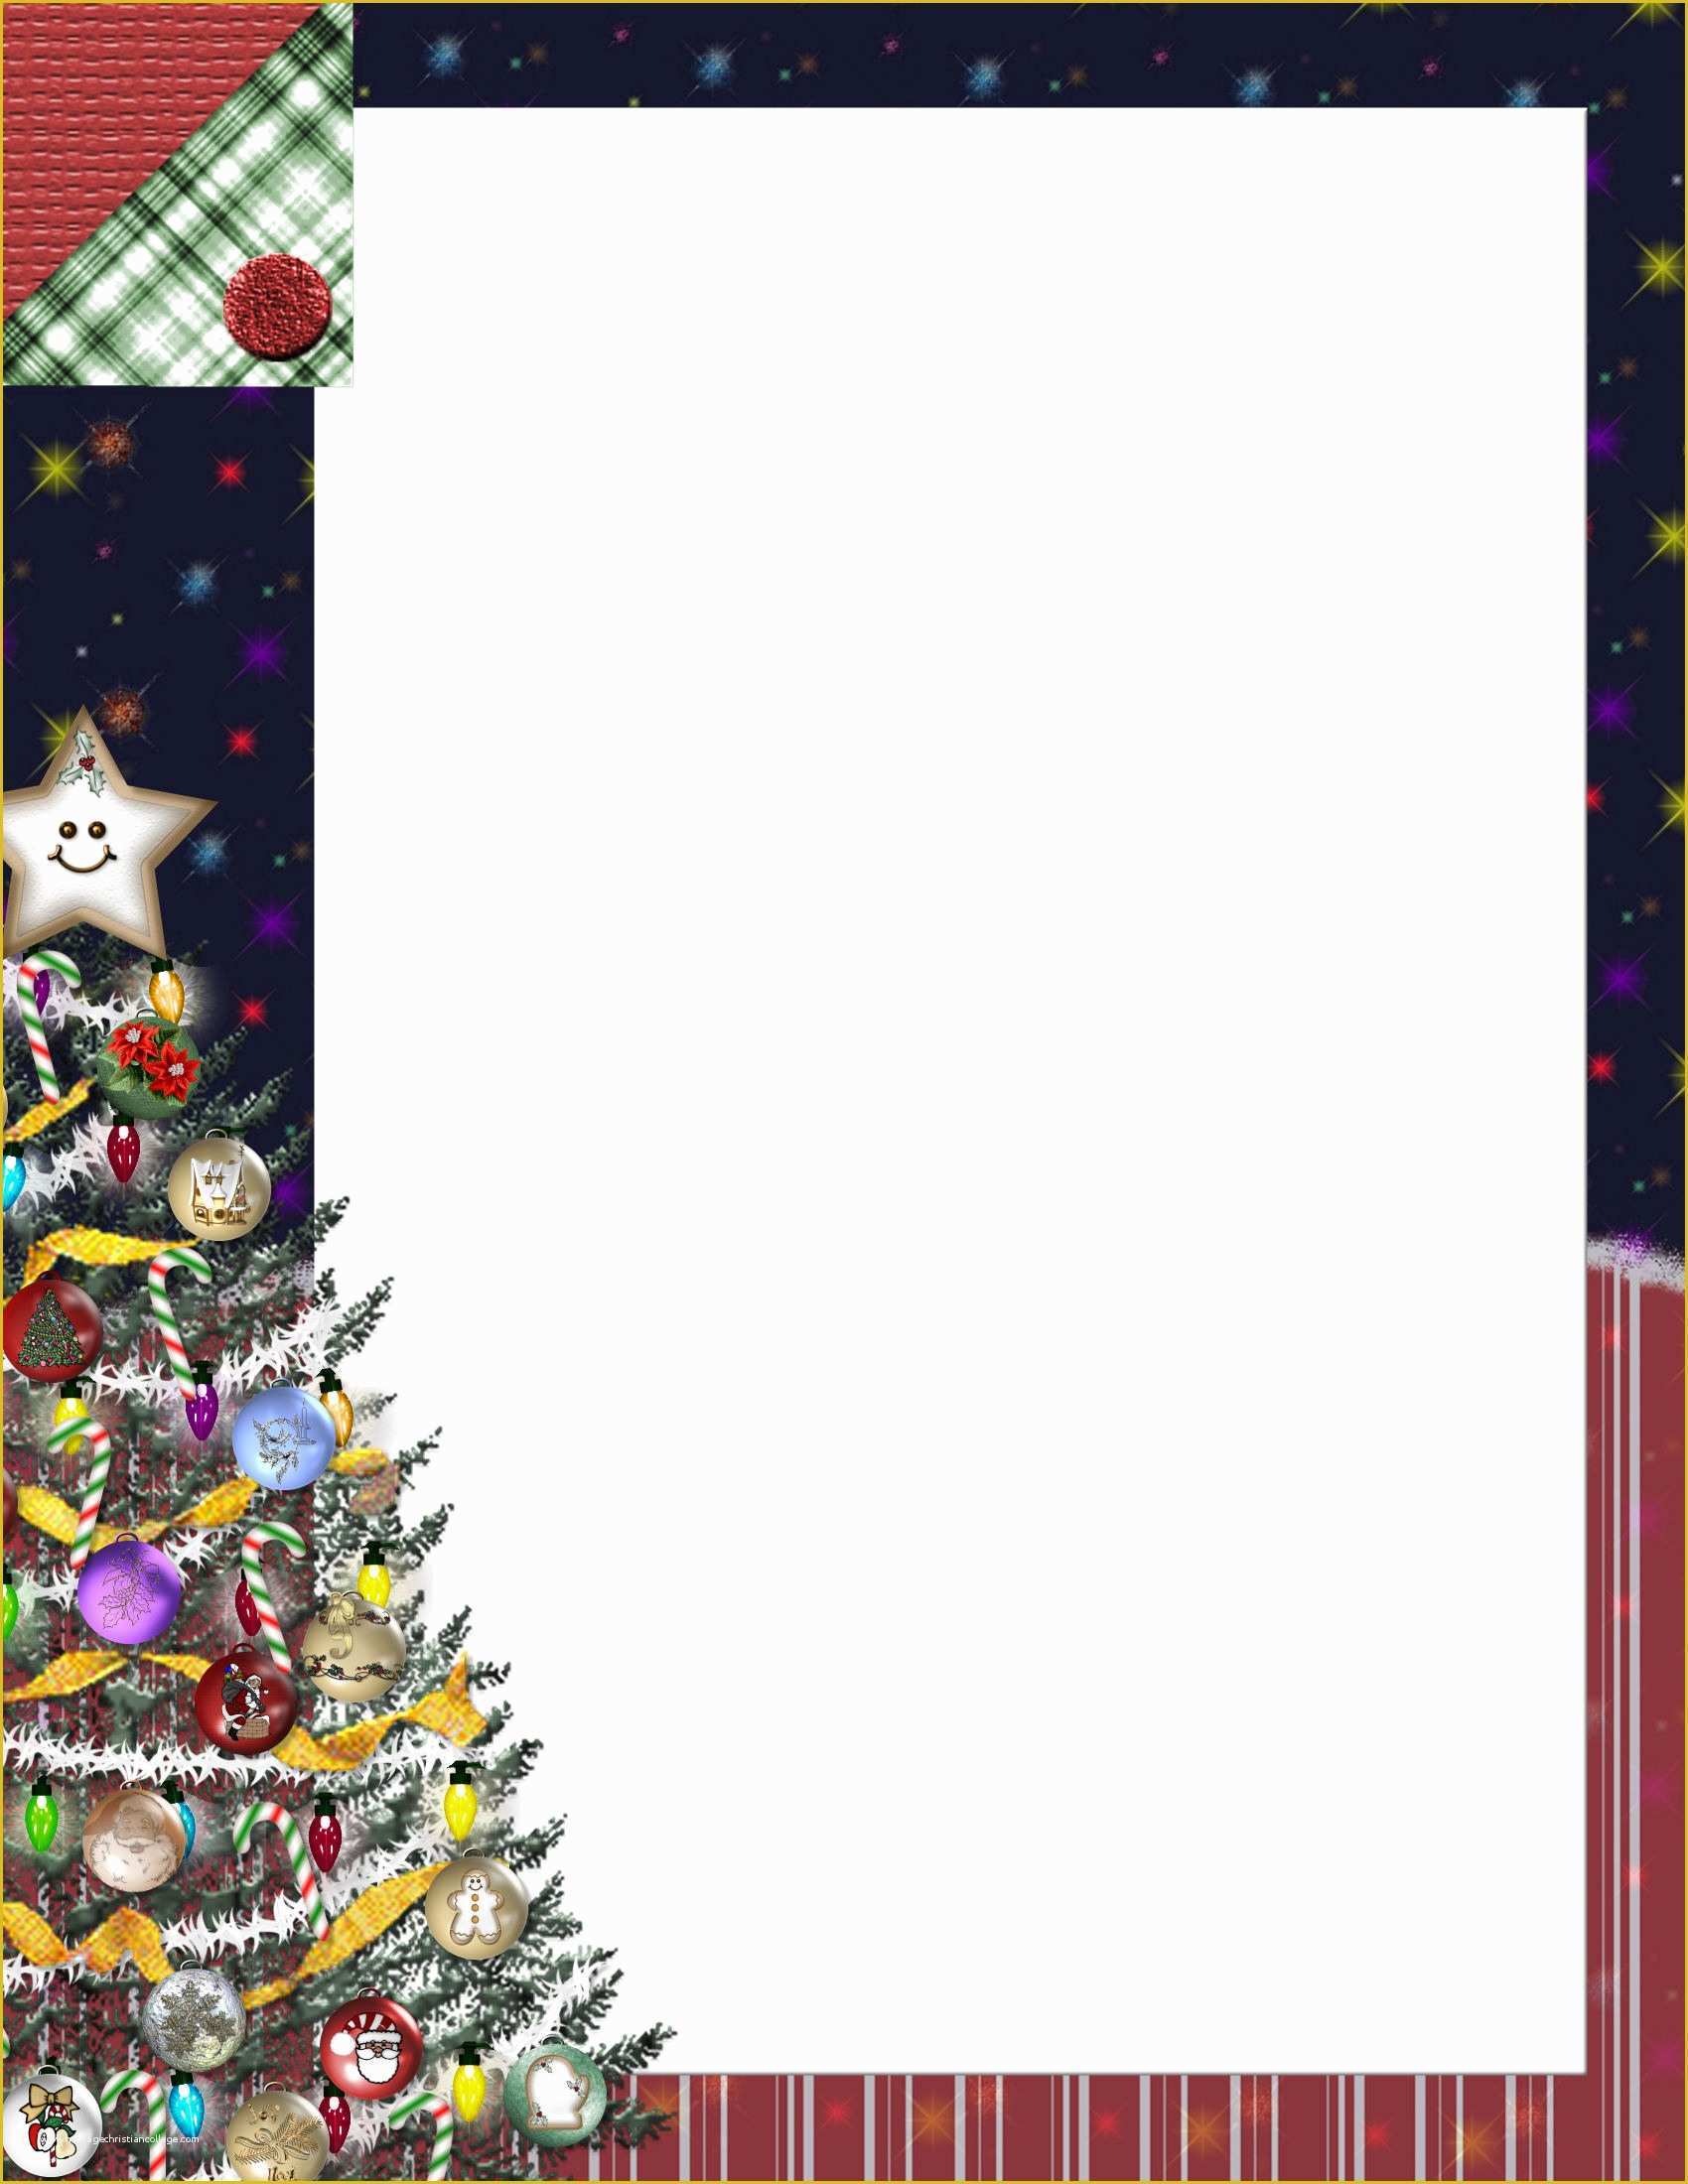 Free Christmas Stationery Templates Of Christmas 1 Free Stationery Template Downloads